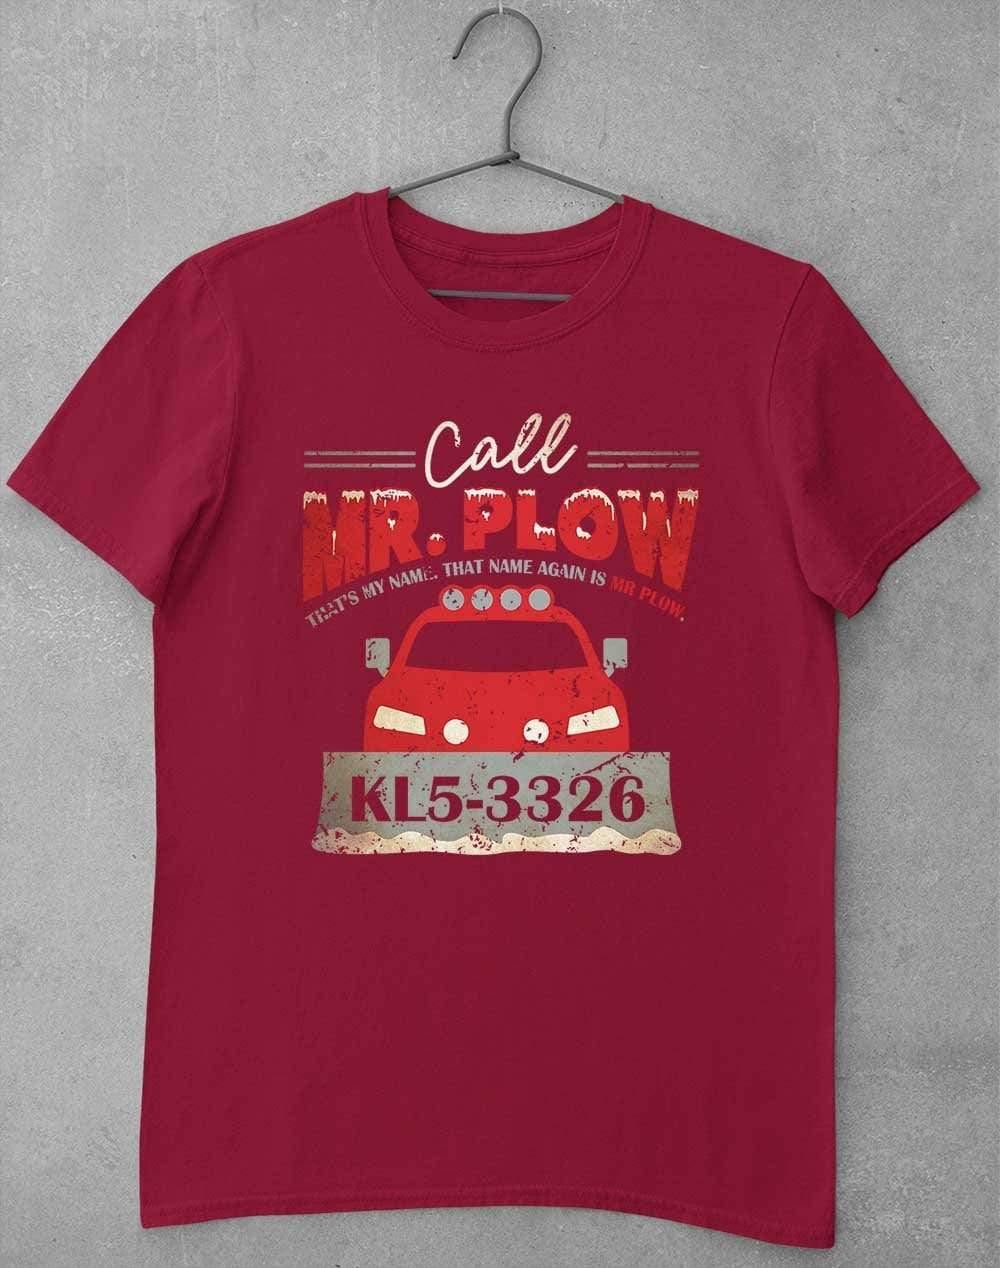 Call Mr Plow T-Shirt S / Cardinal Red  - Off World Tees